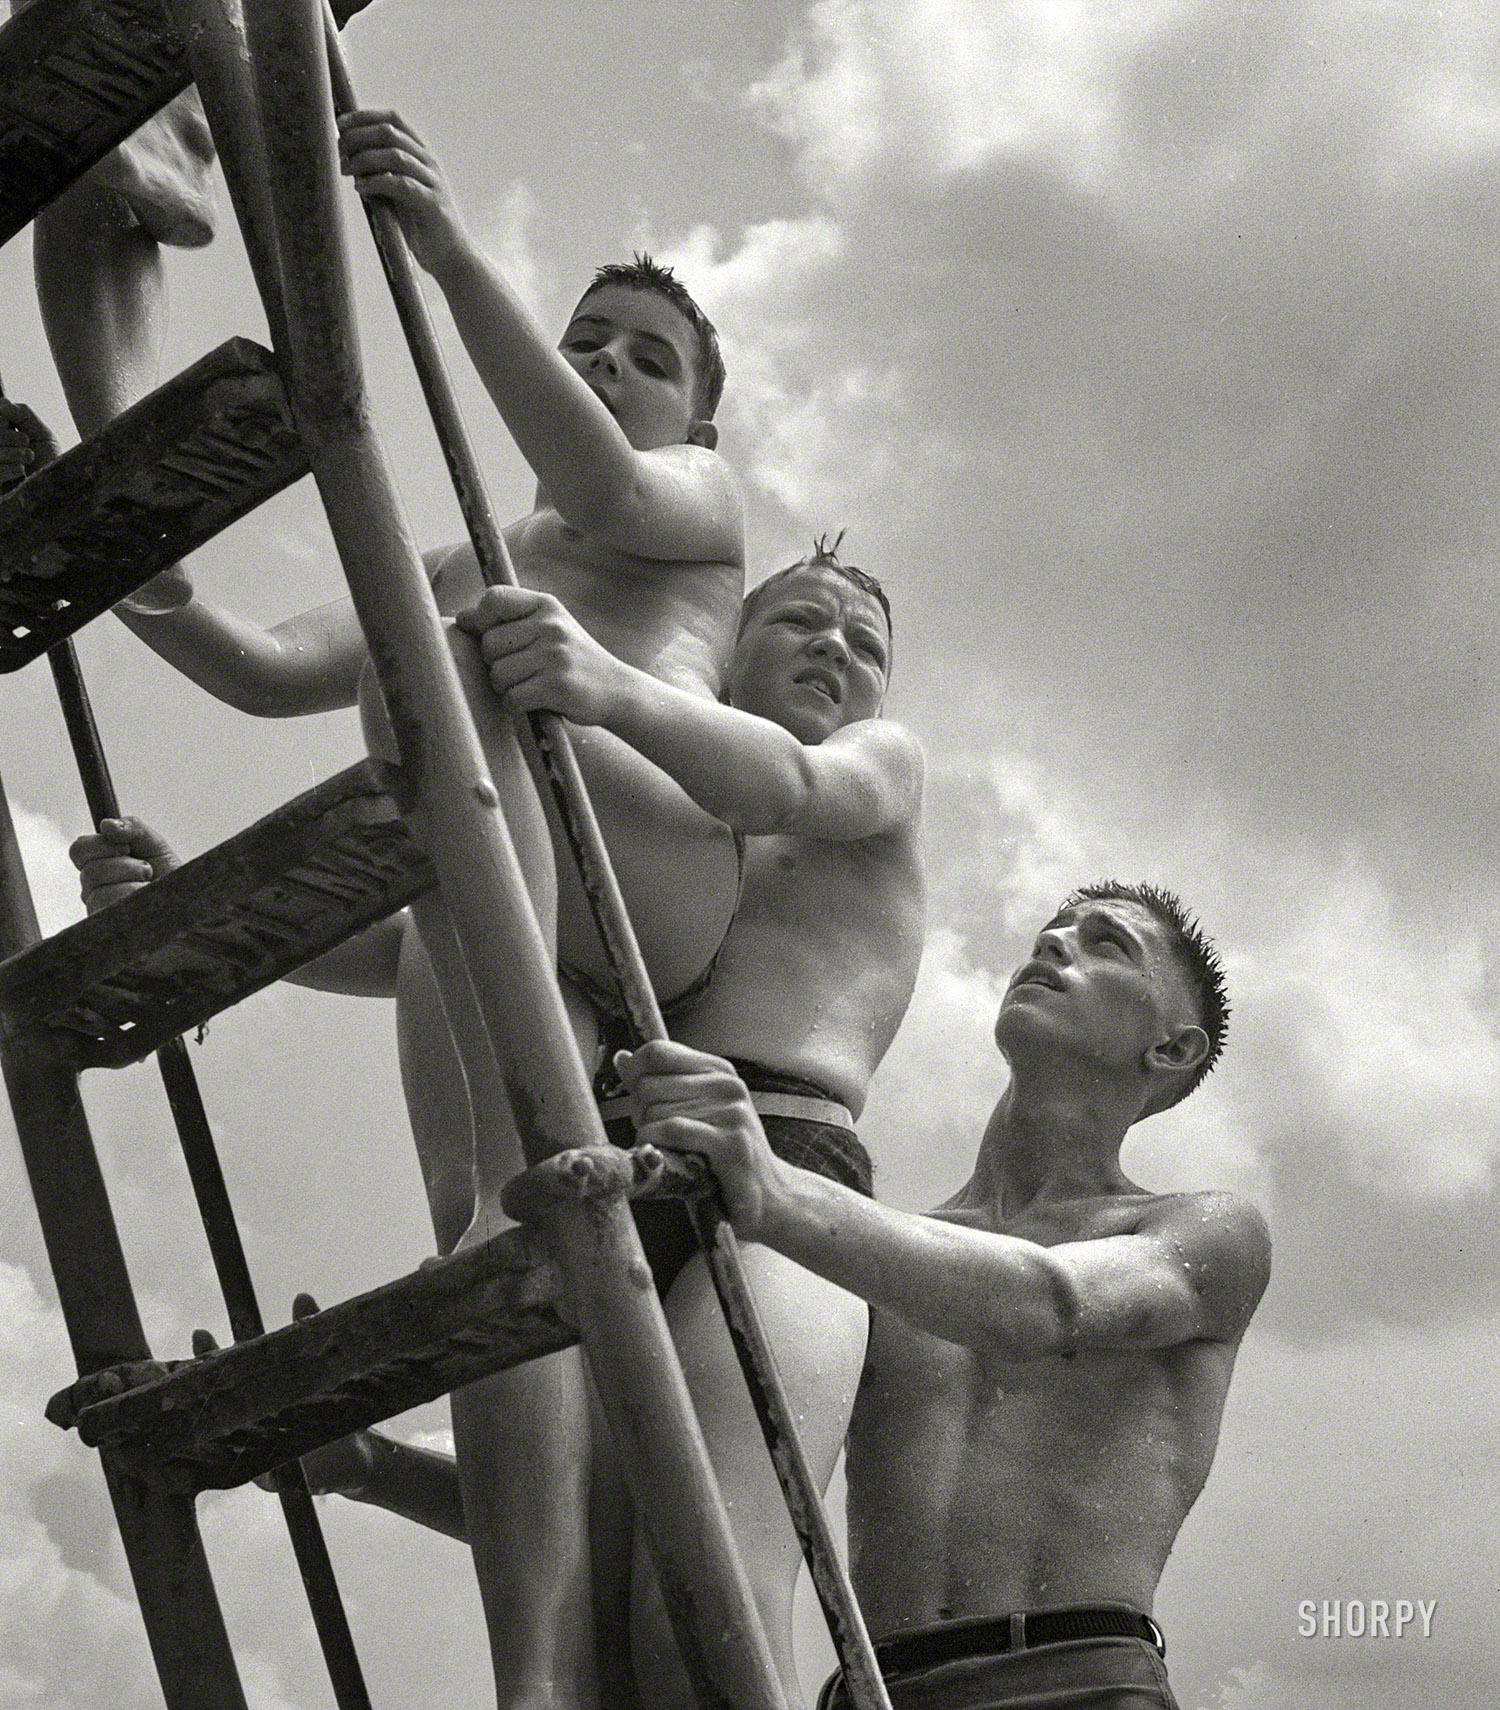 July 1943. Montgomery County, Maryland. "Climbing the ladder to the sliding board at the Glen Echo swimming pool." Medium format nitrate negative by Esther Bubley for the Office of War Information. View full size.